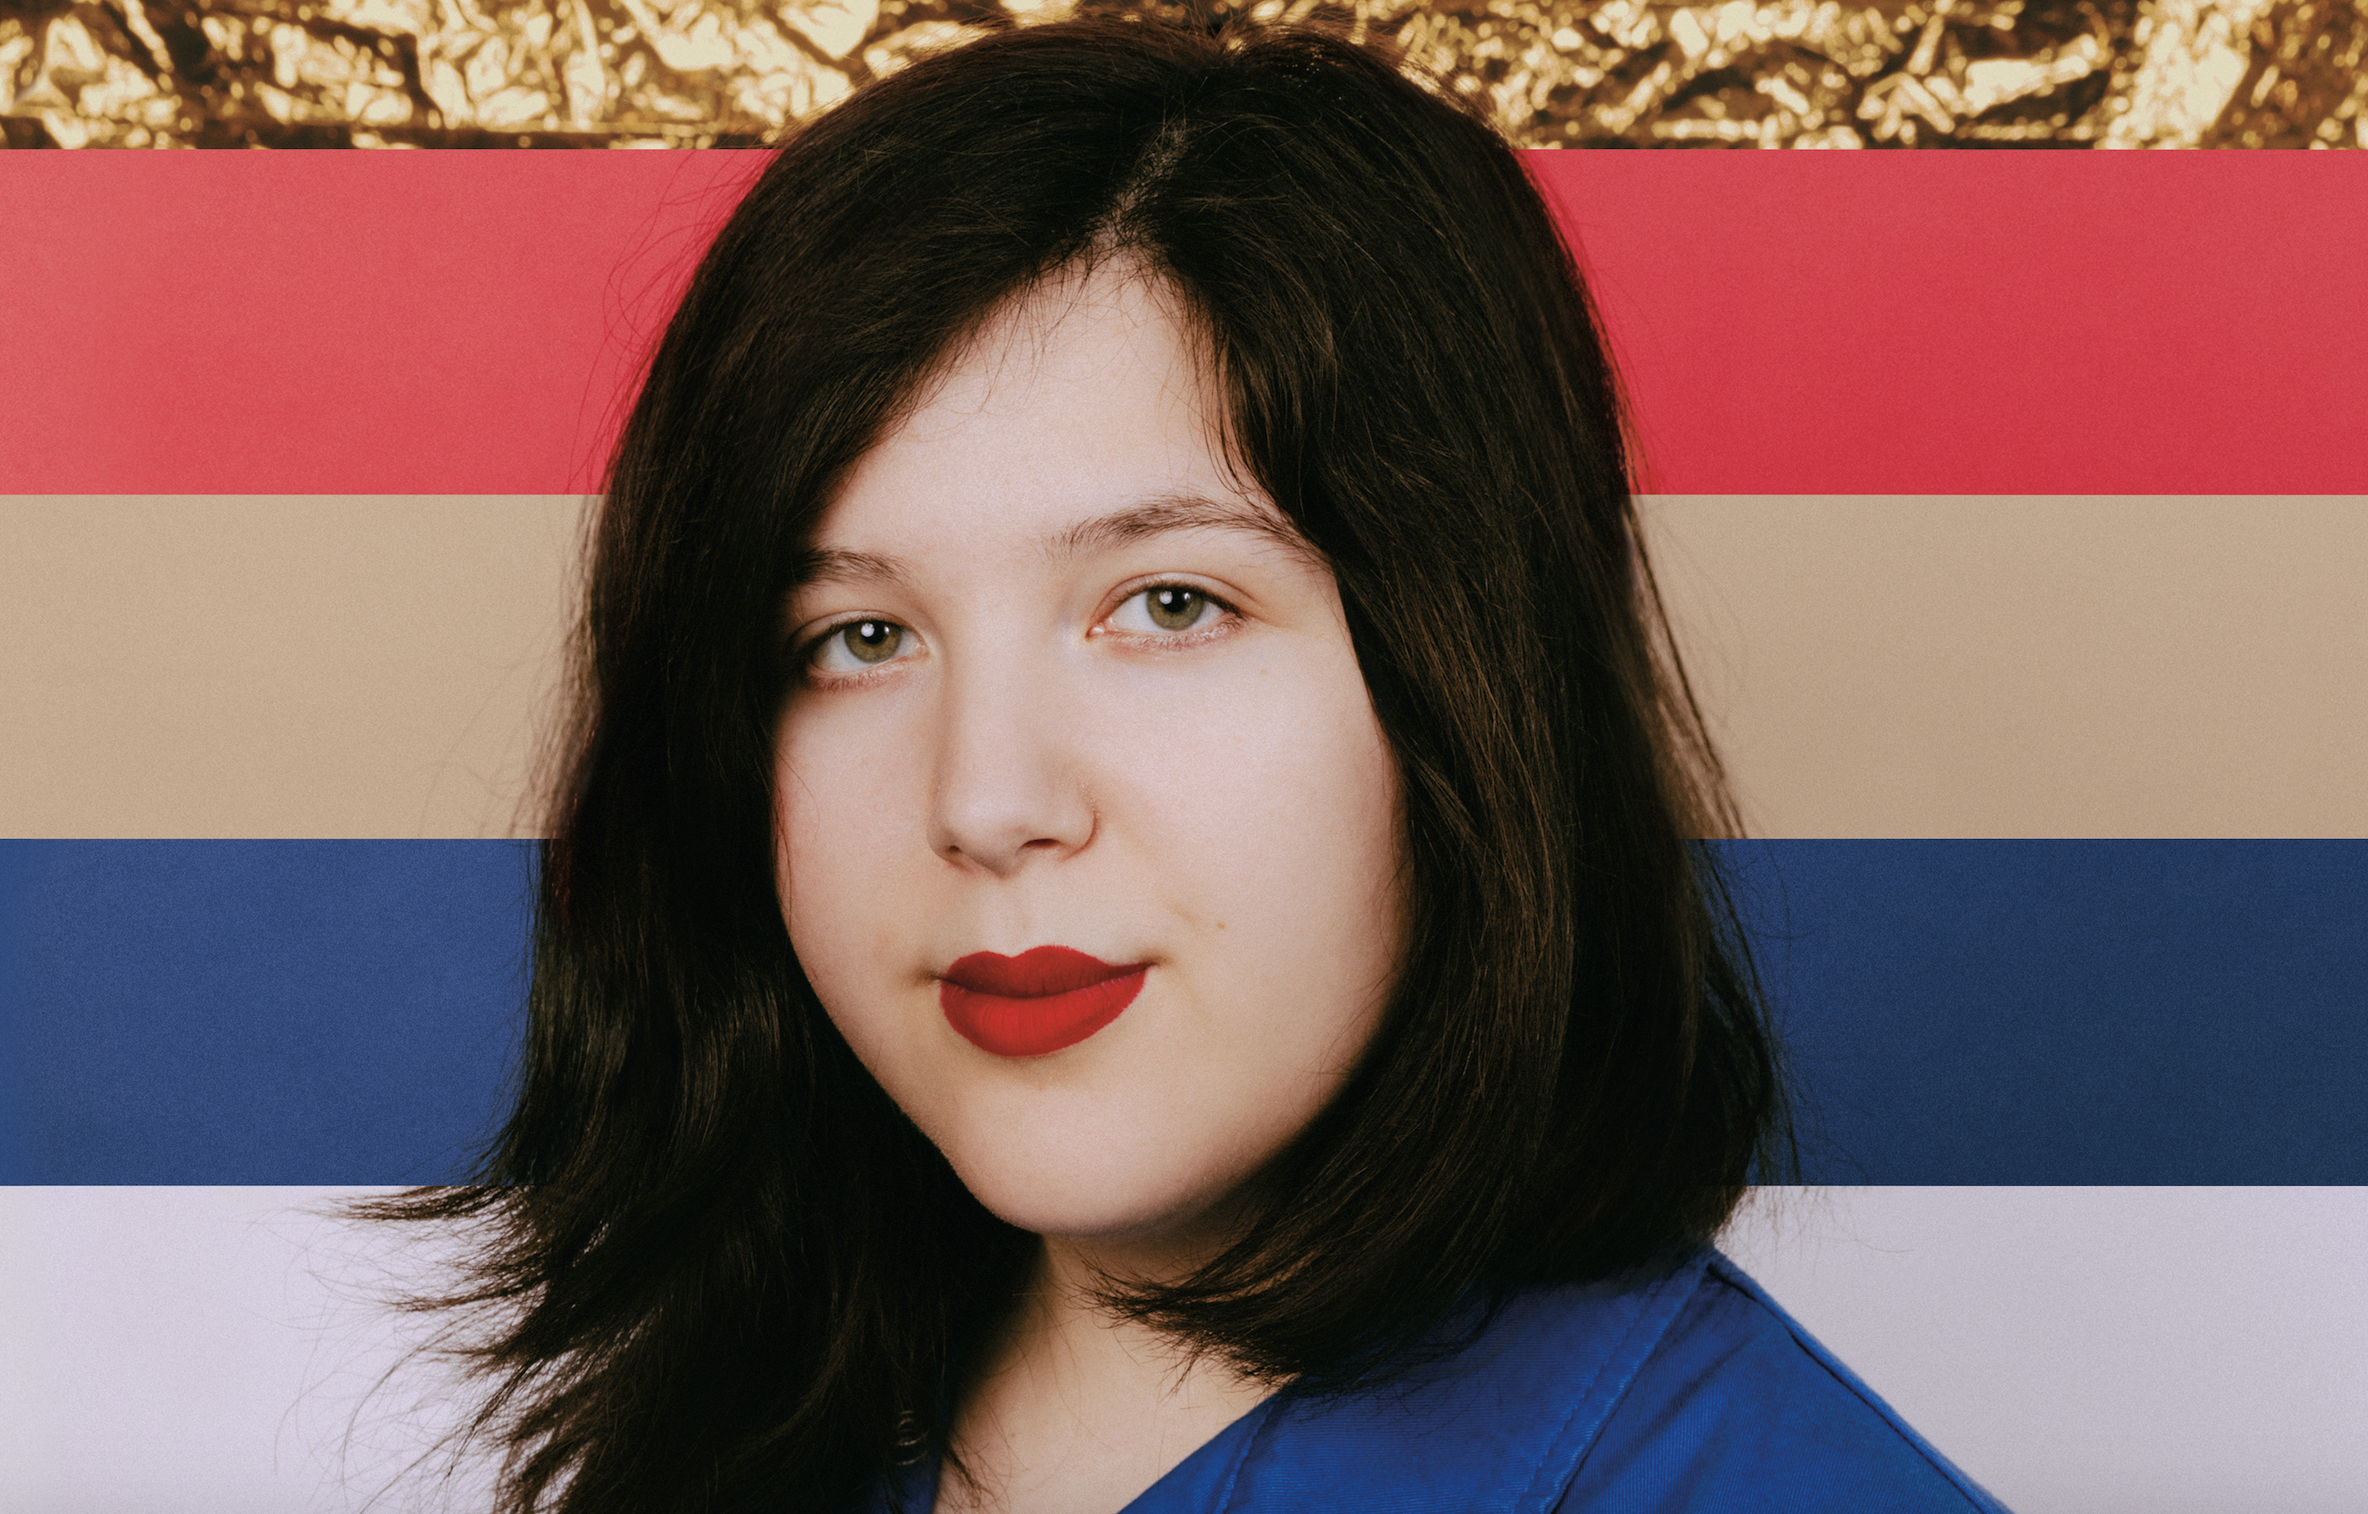 LUCY DACUS – In The Air Tonight